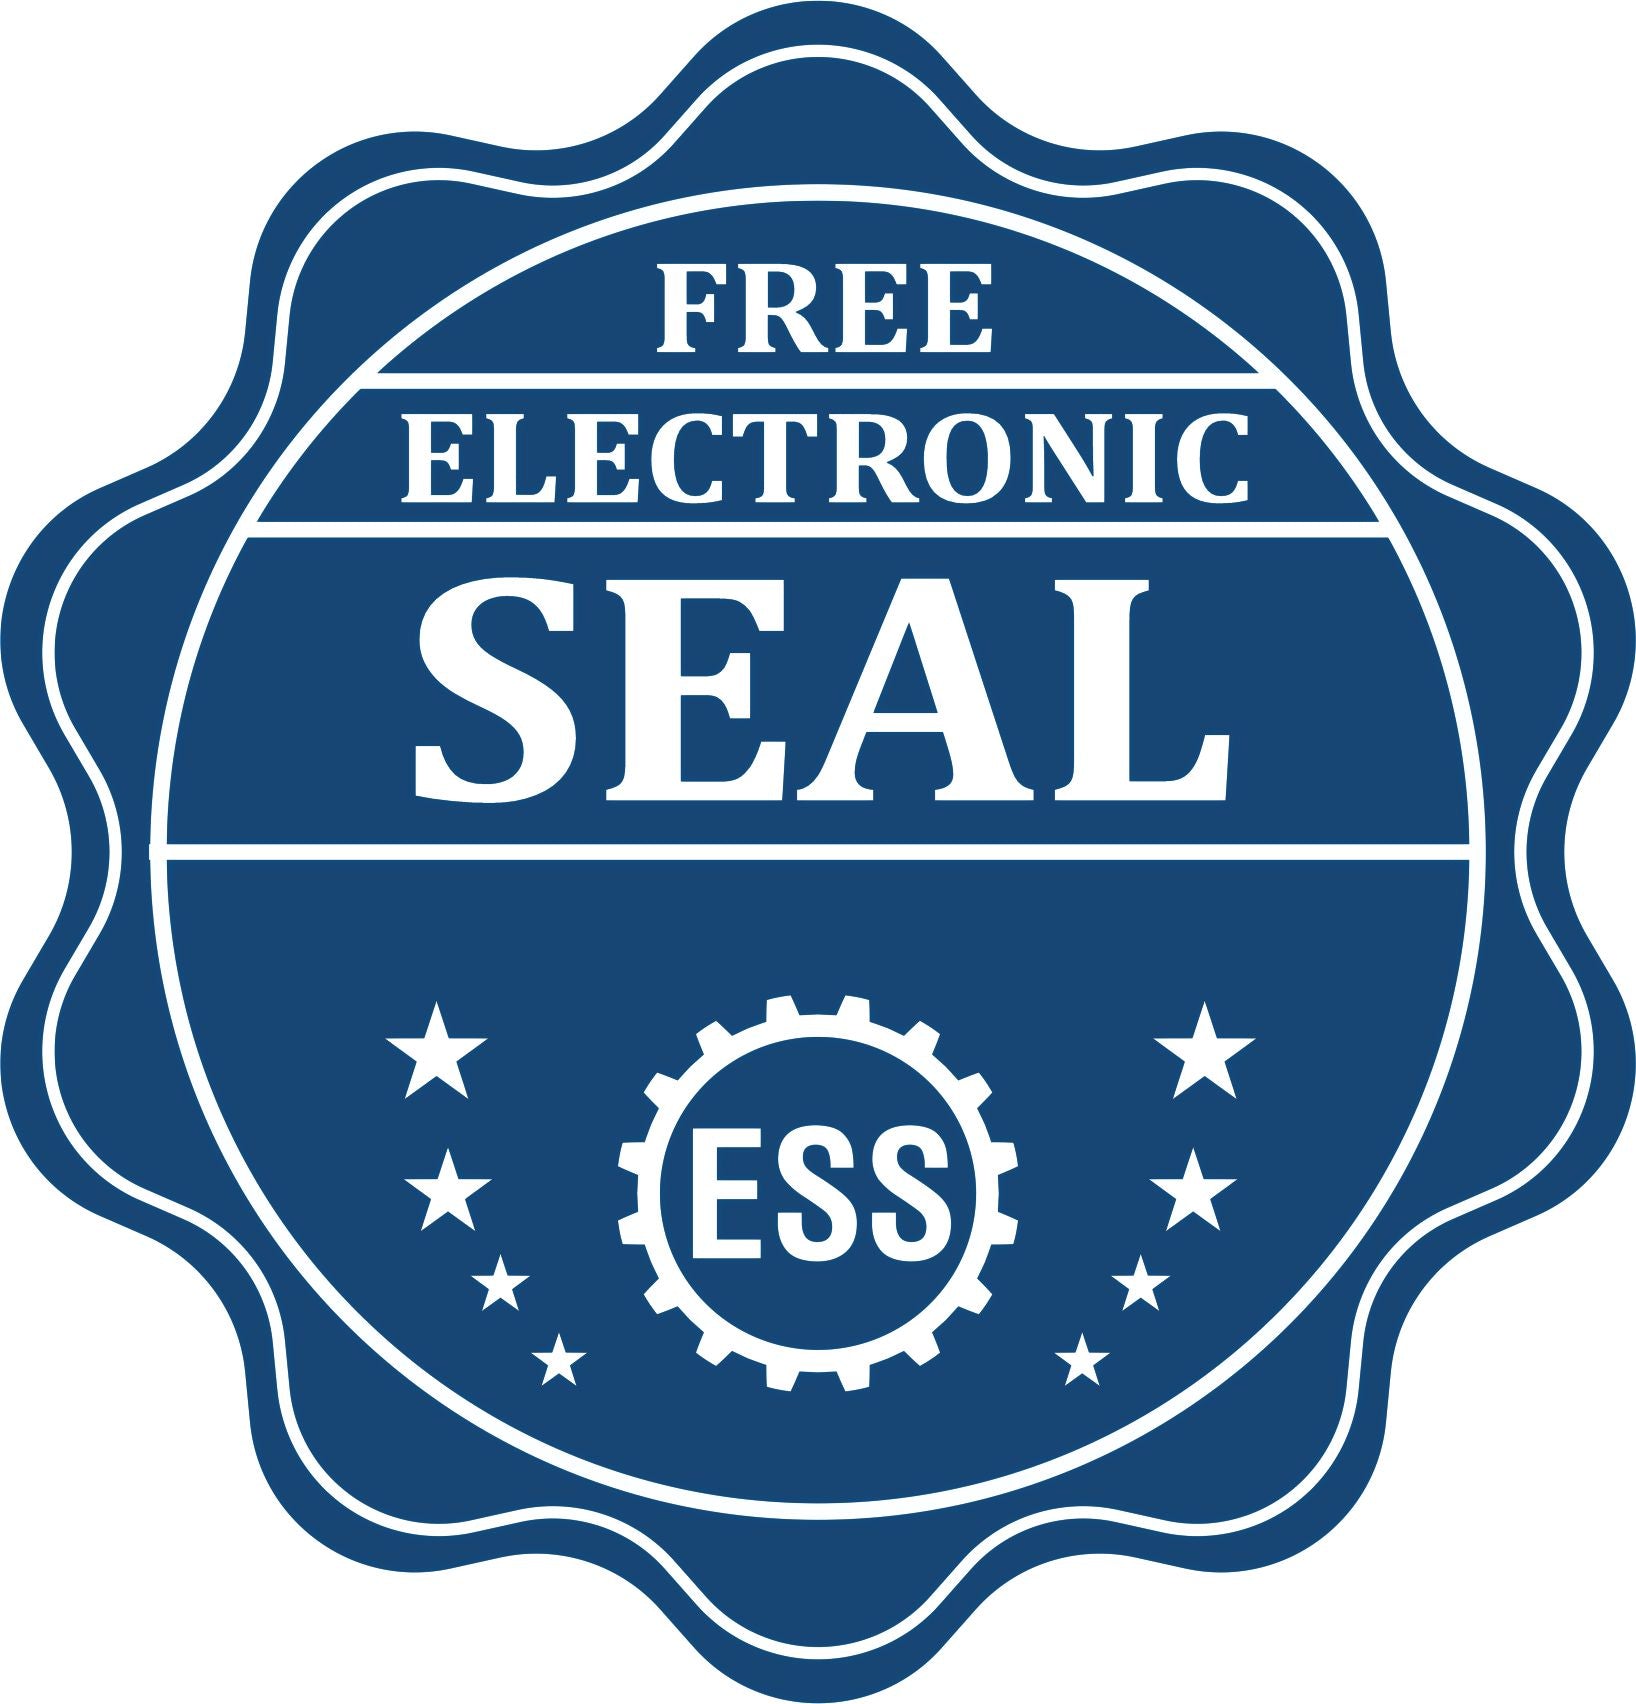 A badge showing a free electronic seal for the Heavy-Duty Vermont Rectangular Notary Stamp with stars and the ESS gear on the emblem.